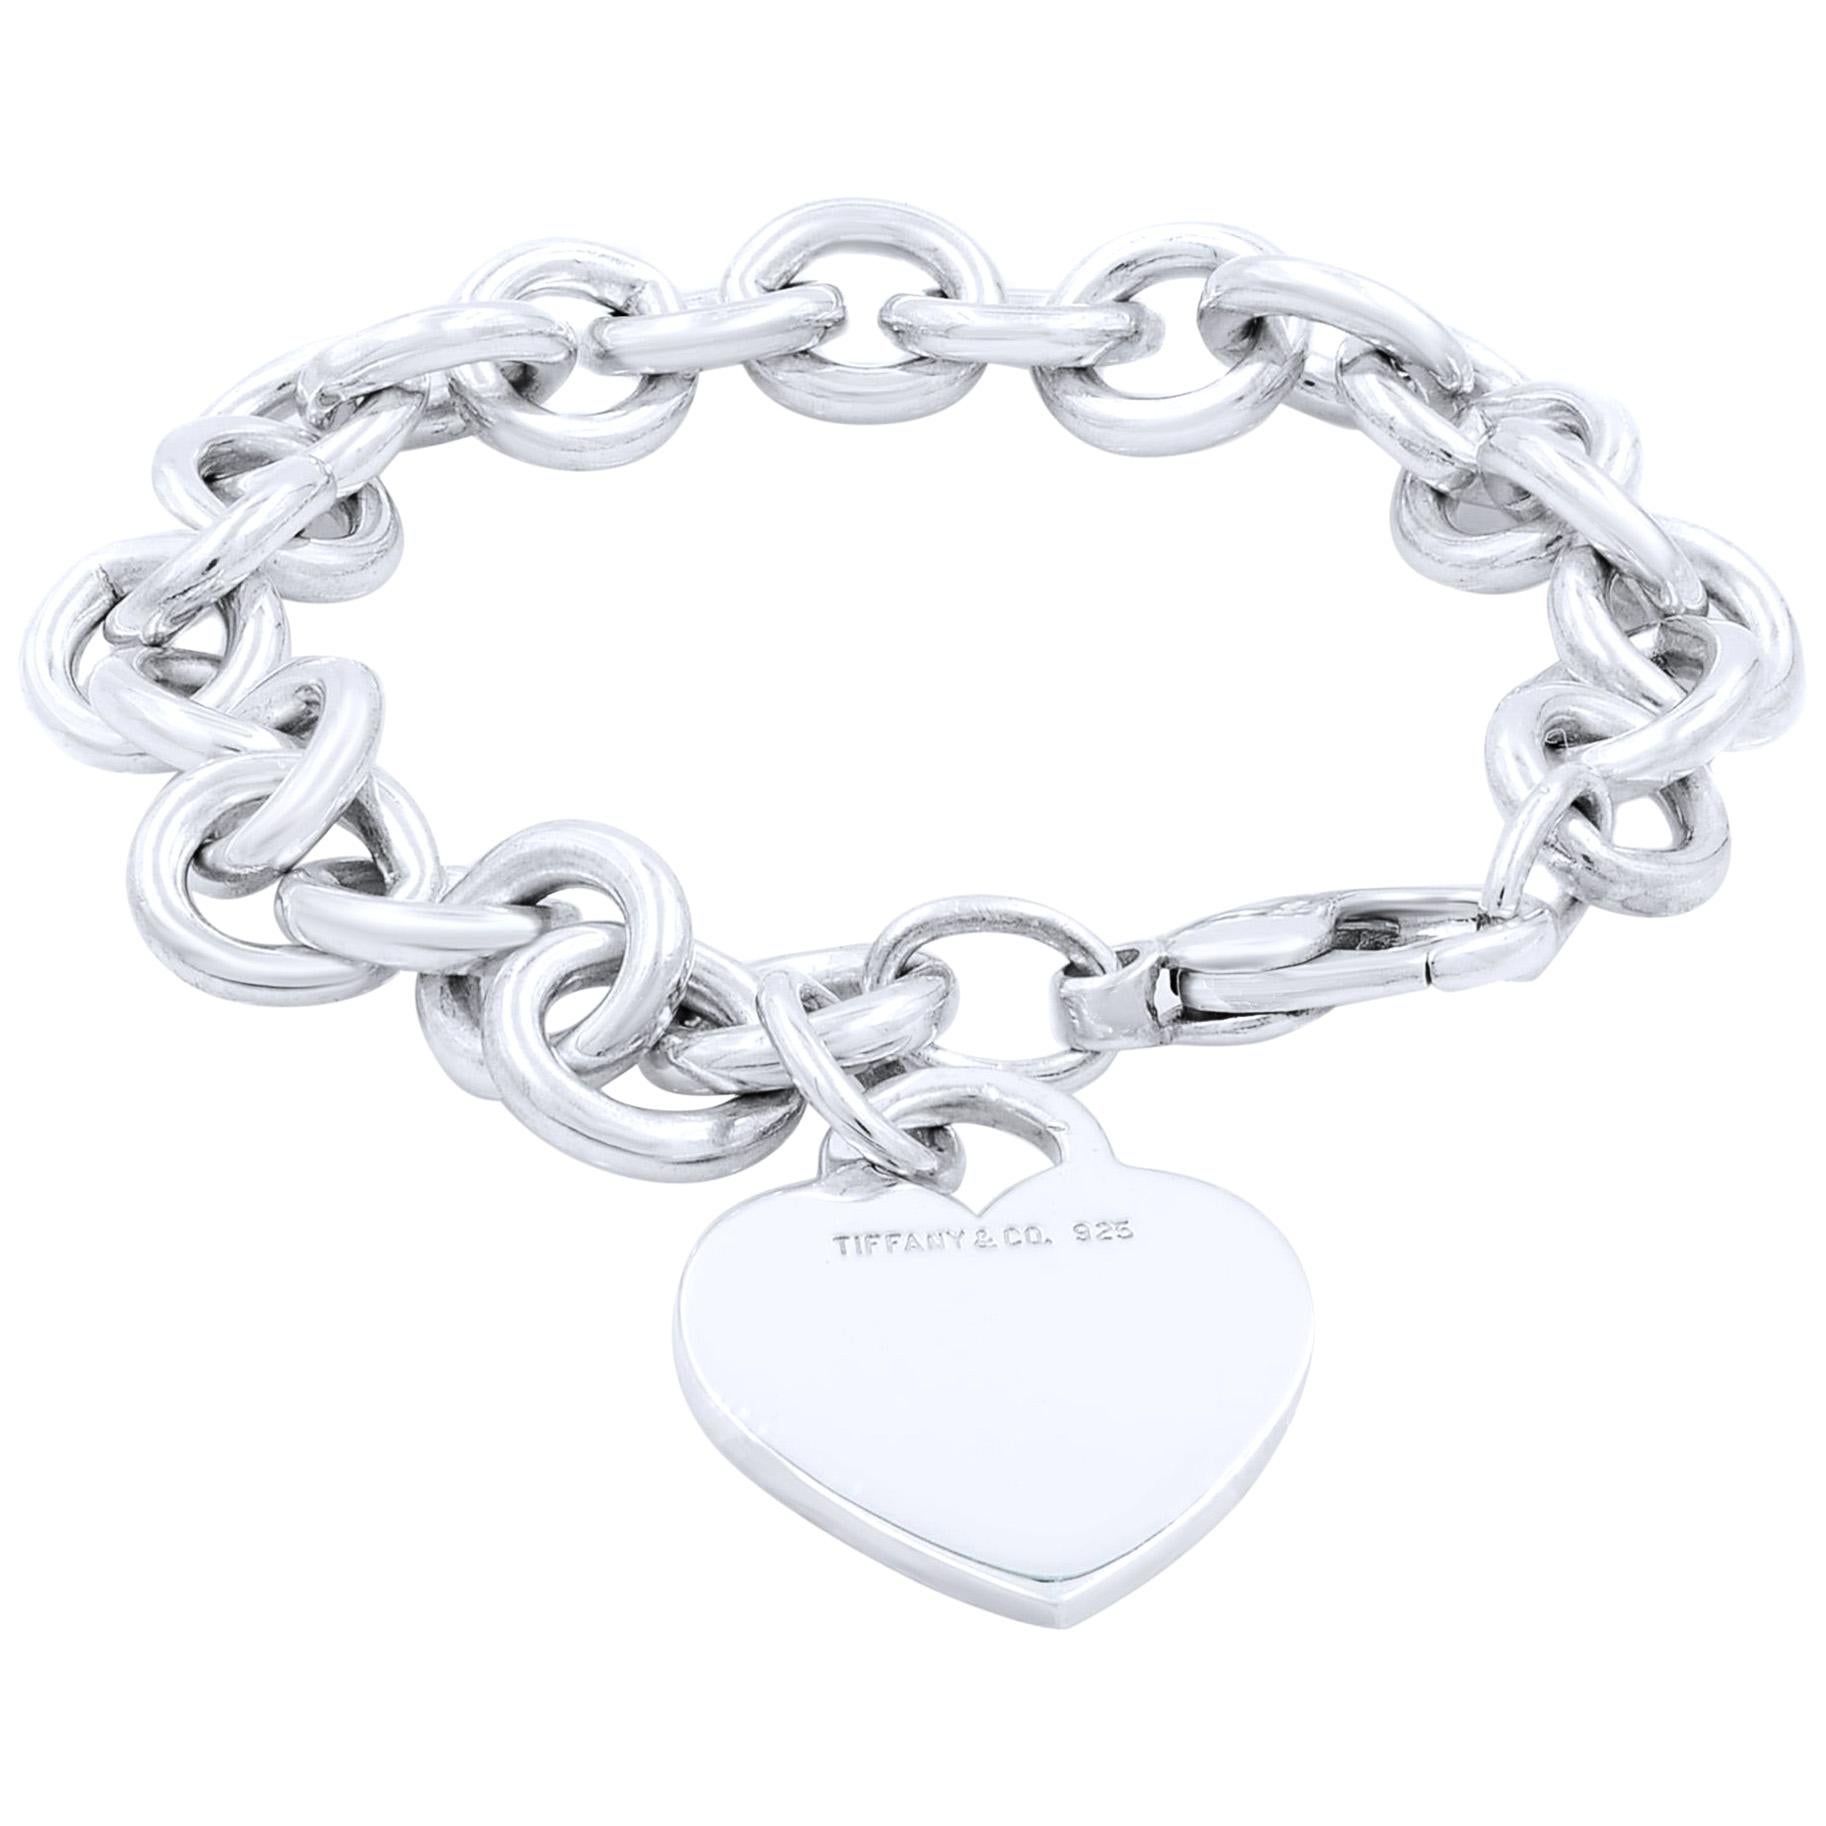 Tiffany & Co. Sterling Silver Heart Tag Toggle Charm Bracelet